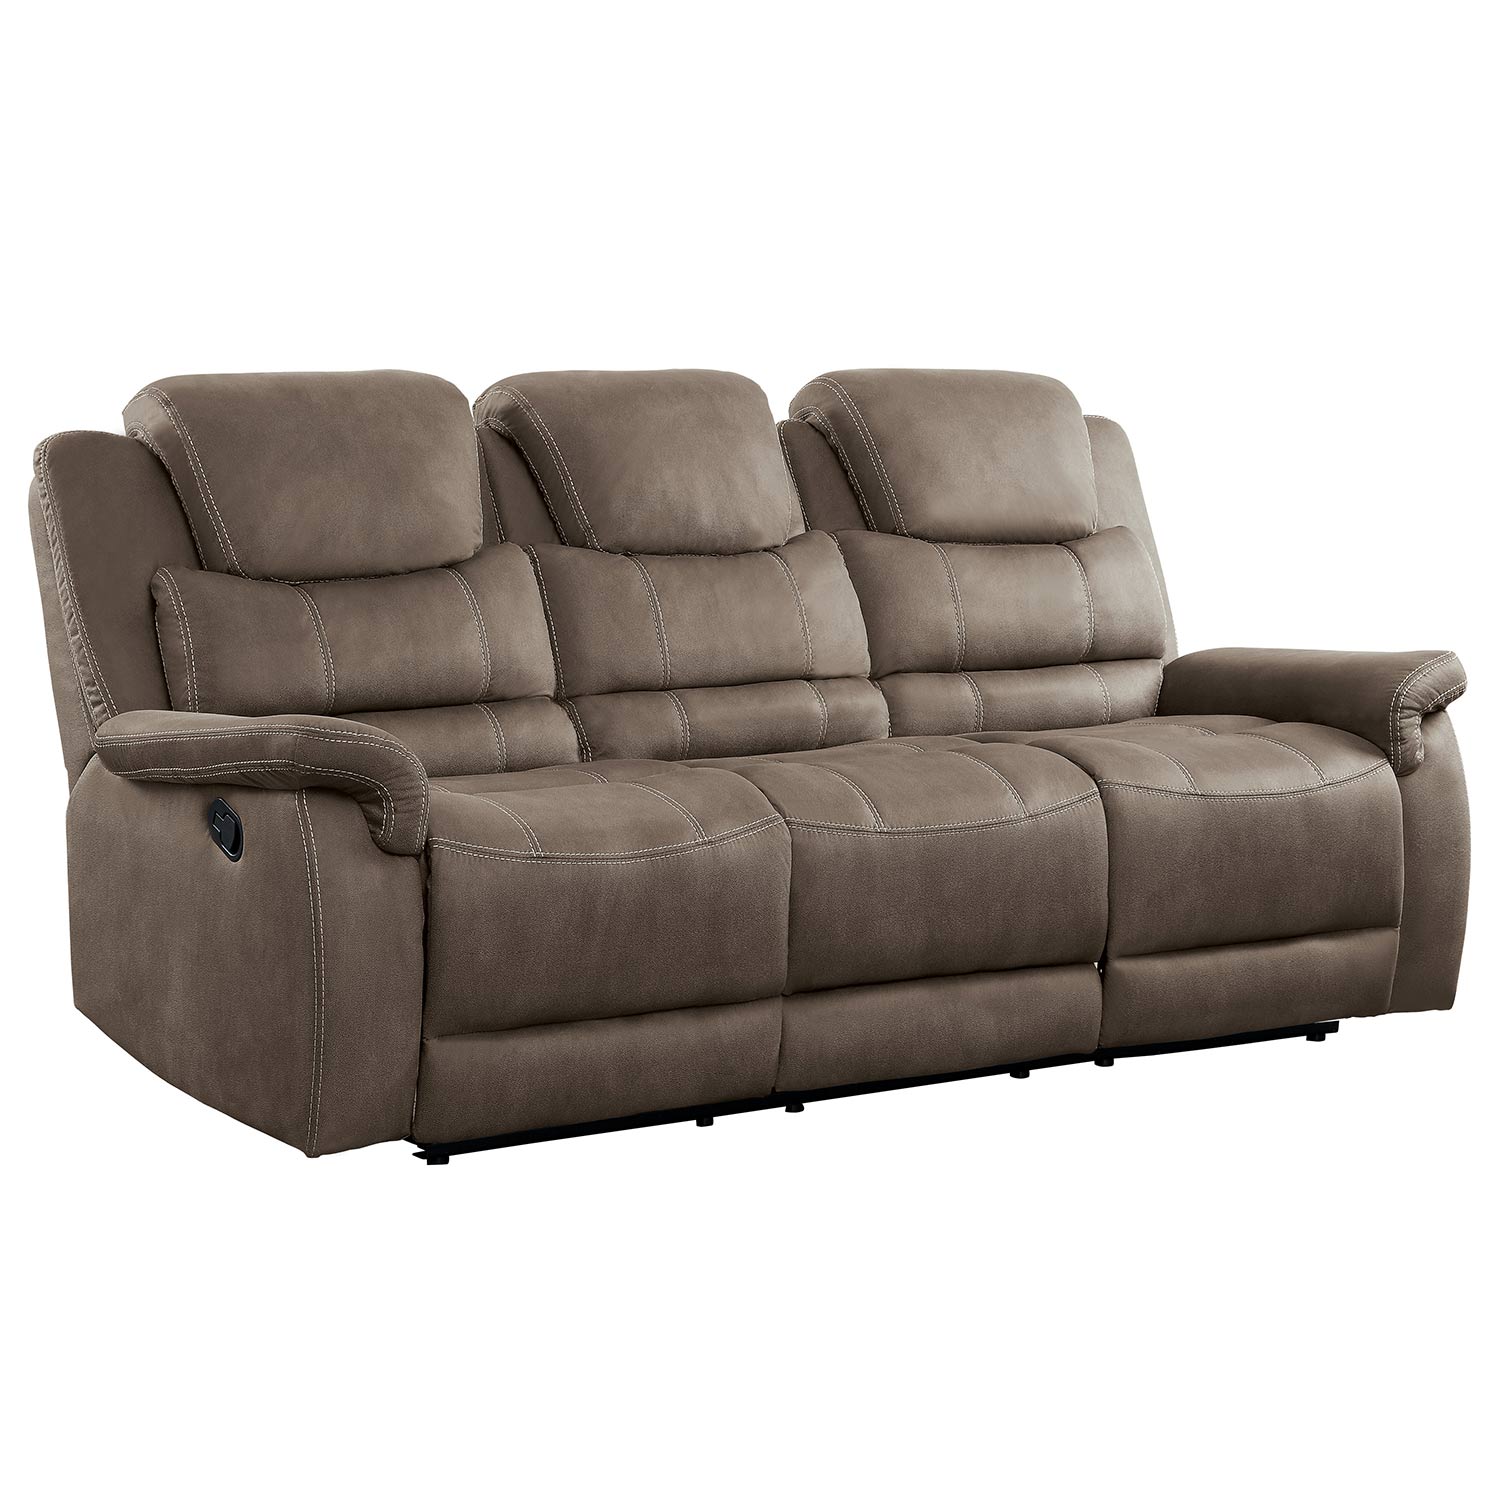 Homelegance Shola Power Double Reclining Sofa with Power Headrests, Drop-Down Cup holders and Receptacles - Brown